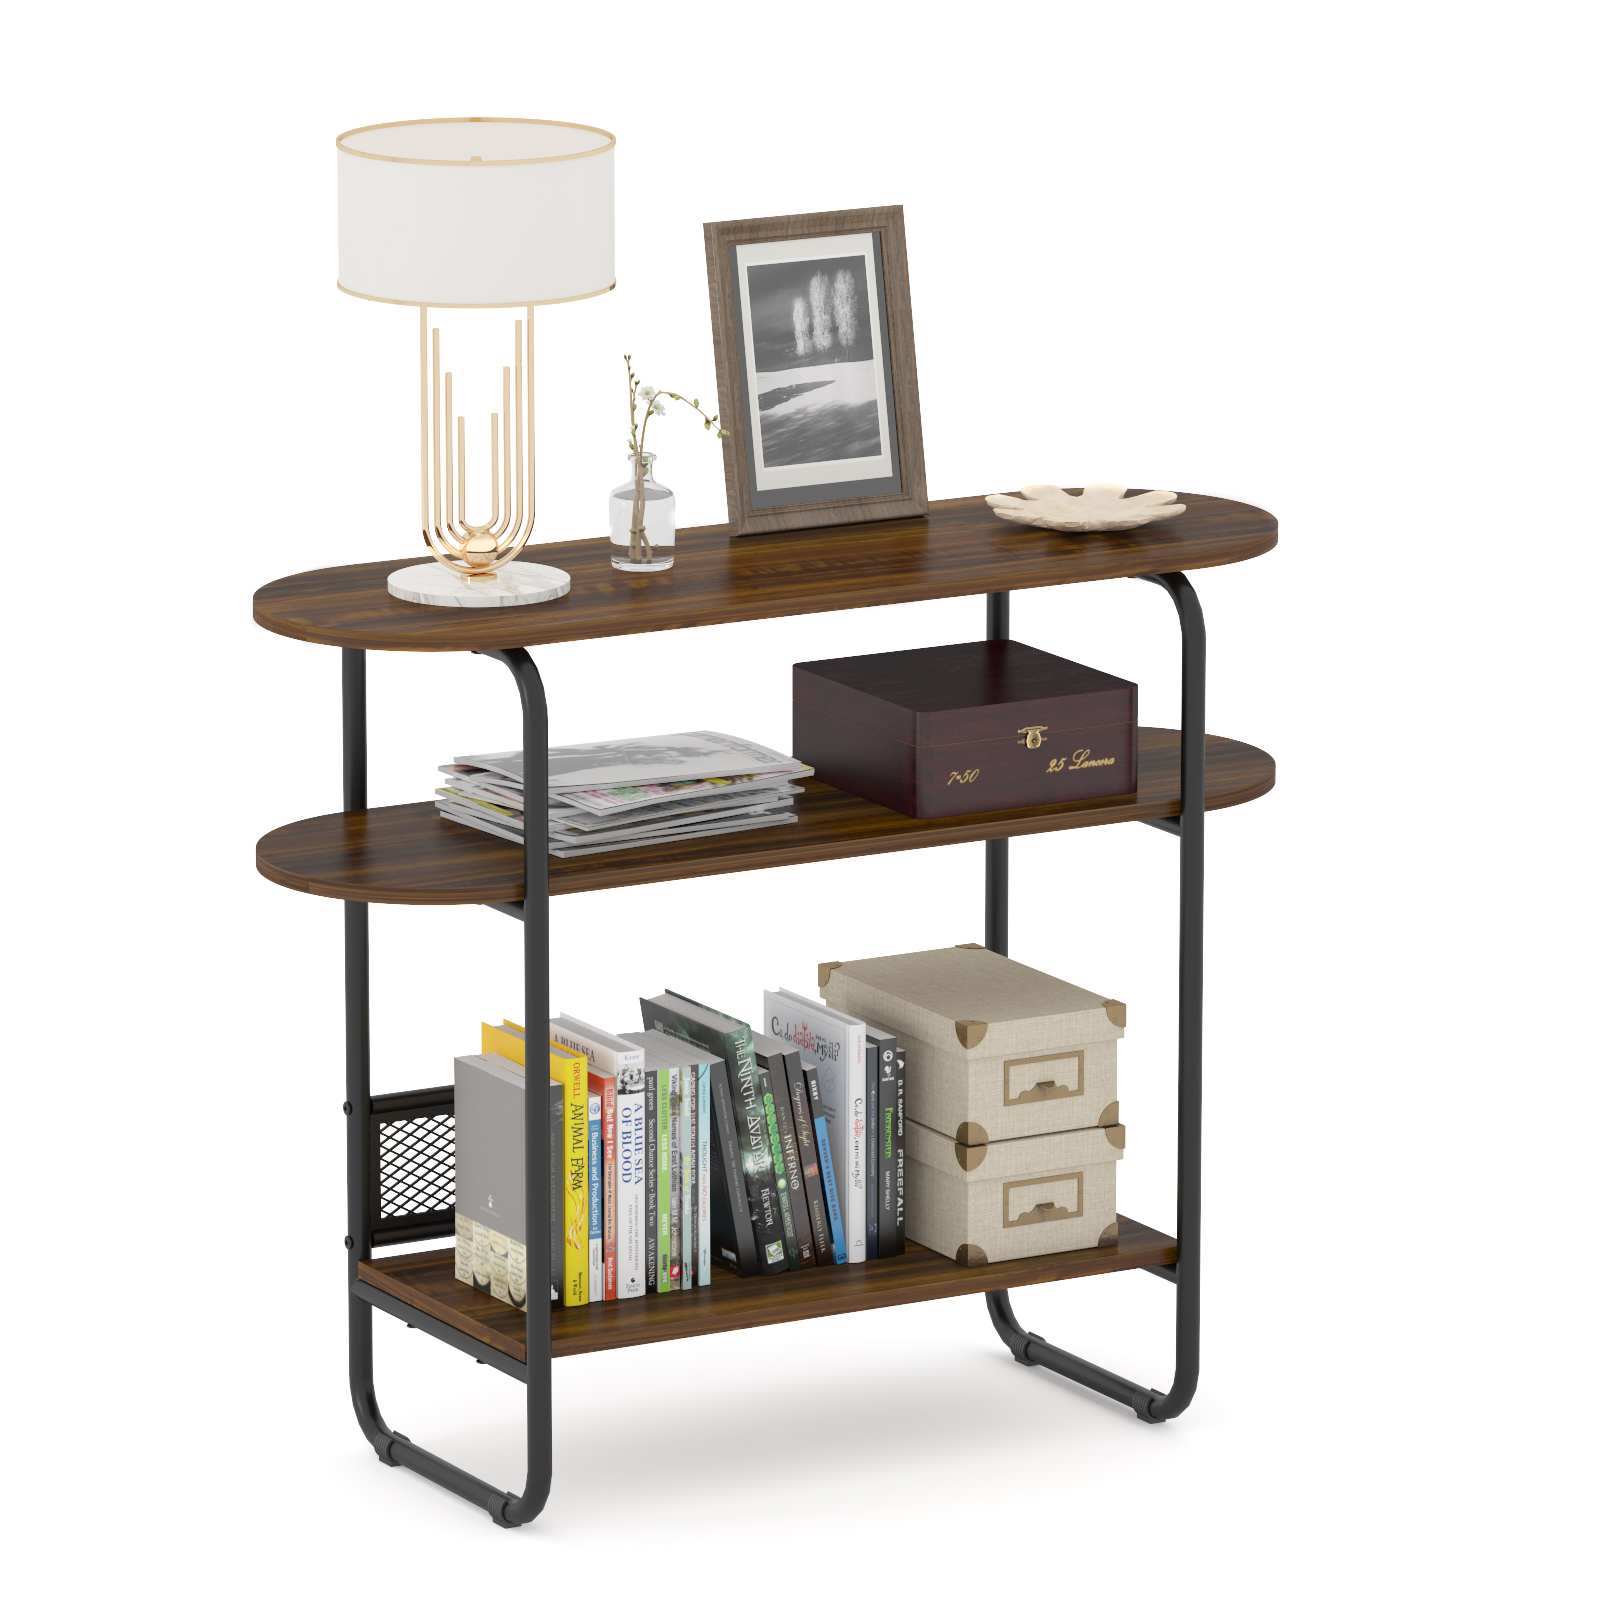 Details about   Industrial Sofa Console Table 3 Tiers Horizontal Entry Tables With Open Shelf 